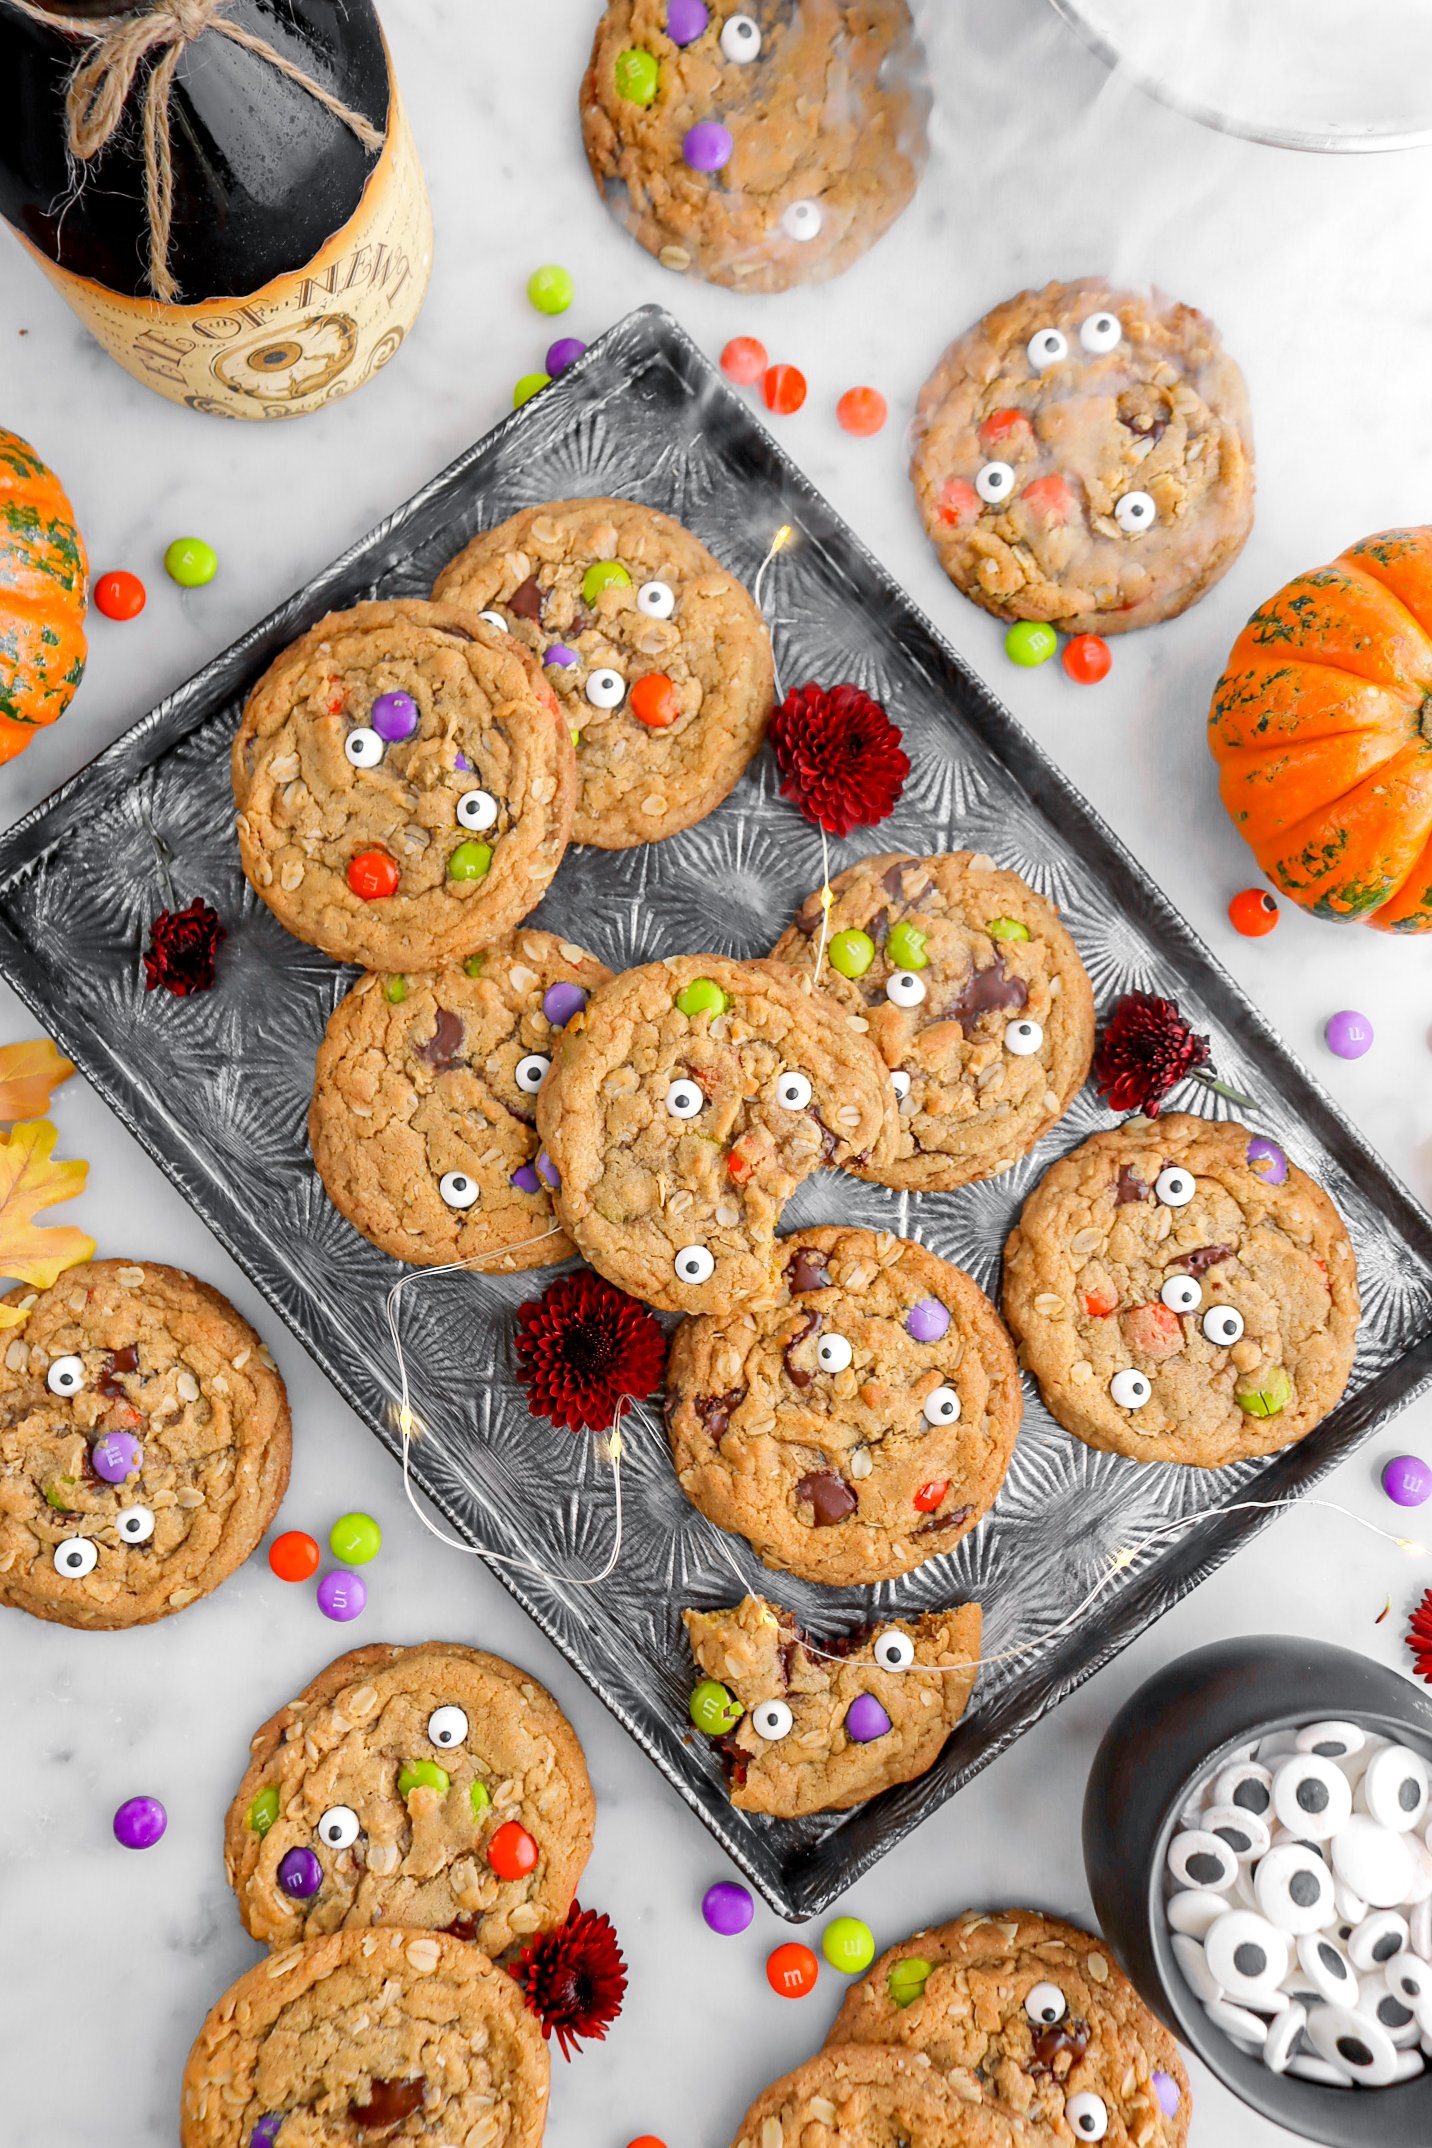 overhead image of monster cookies on dark sheet pan with one cookie missing a bite, a string of lights, red flowers, and more cookies around on marble surface.